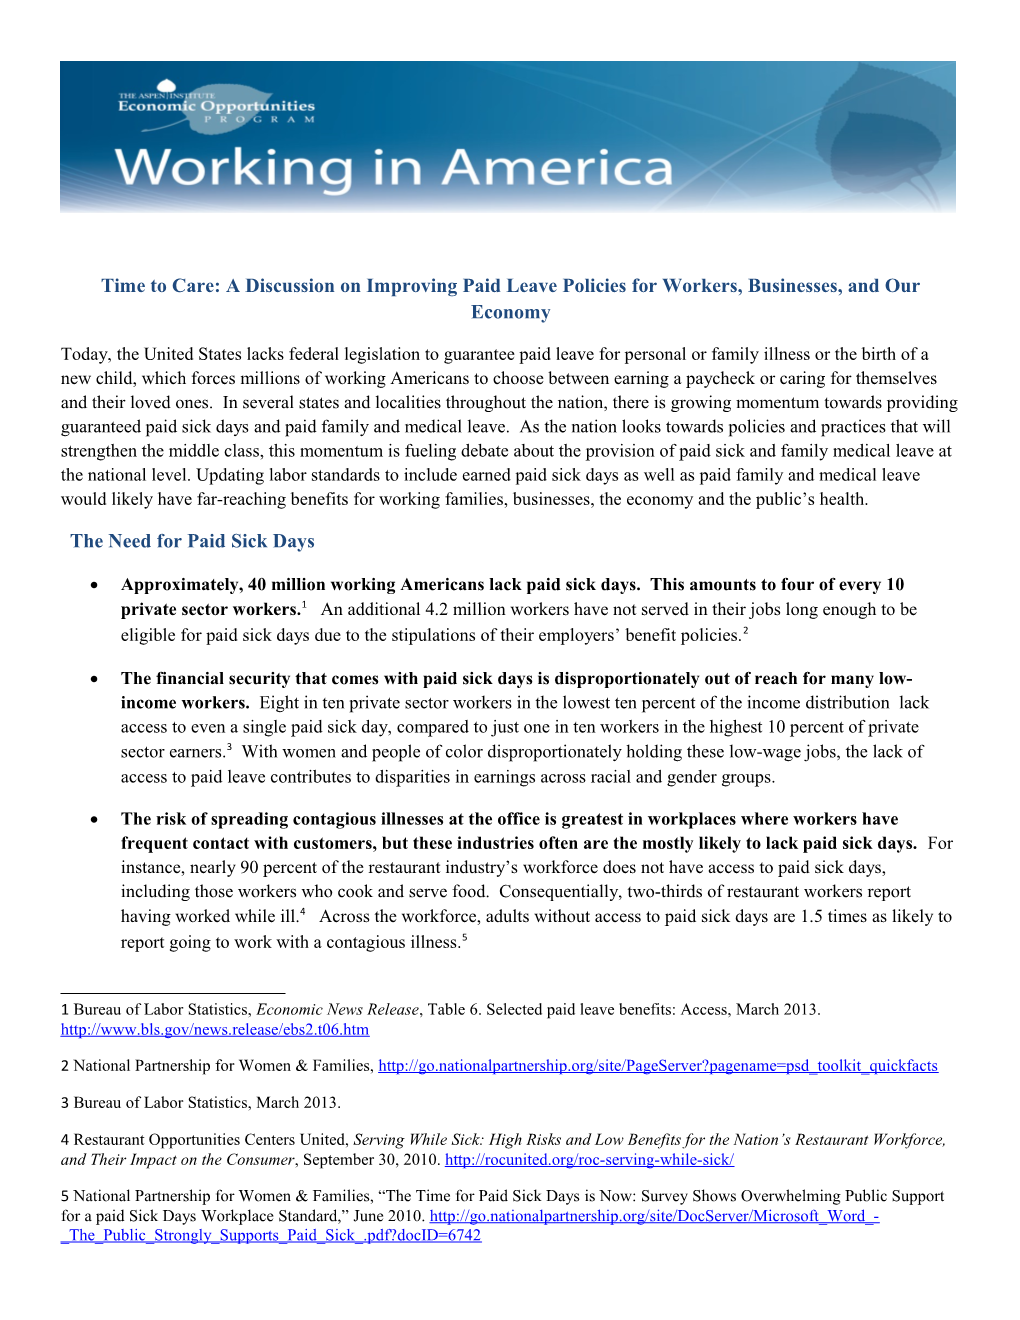 Time to Care: a Discussion on Improving Paid Leave Policies for Workers, Businesses, And